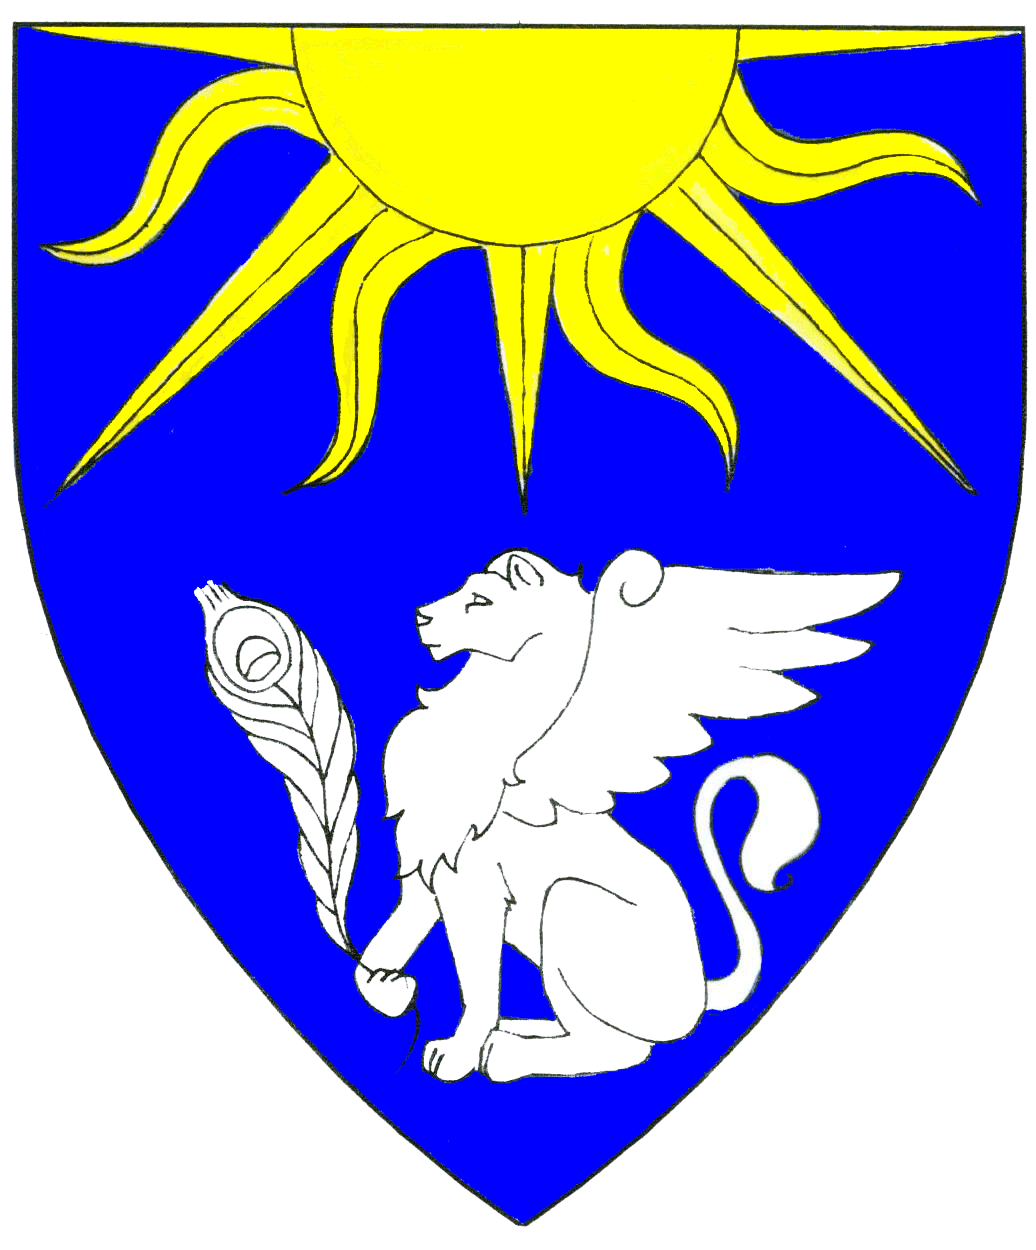 The arms of Helene Lyoness